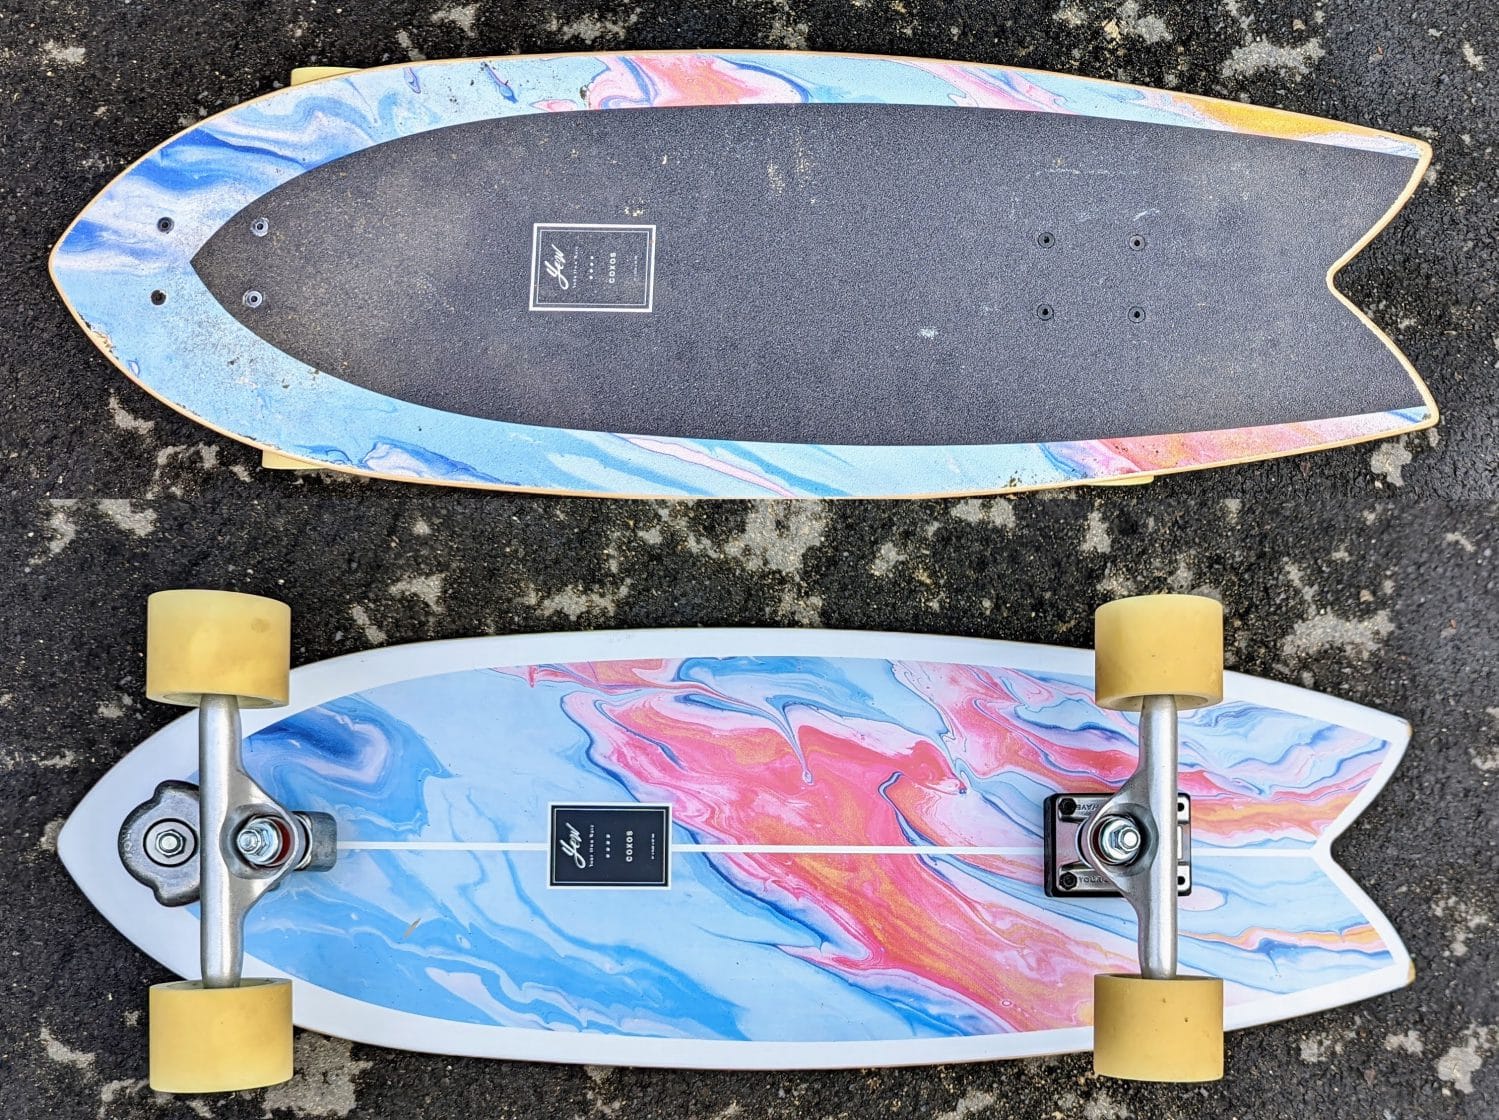 Yow Coxox Surfskate